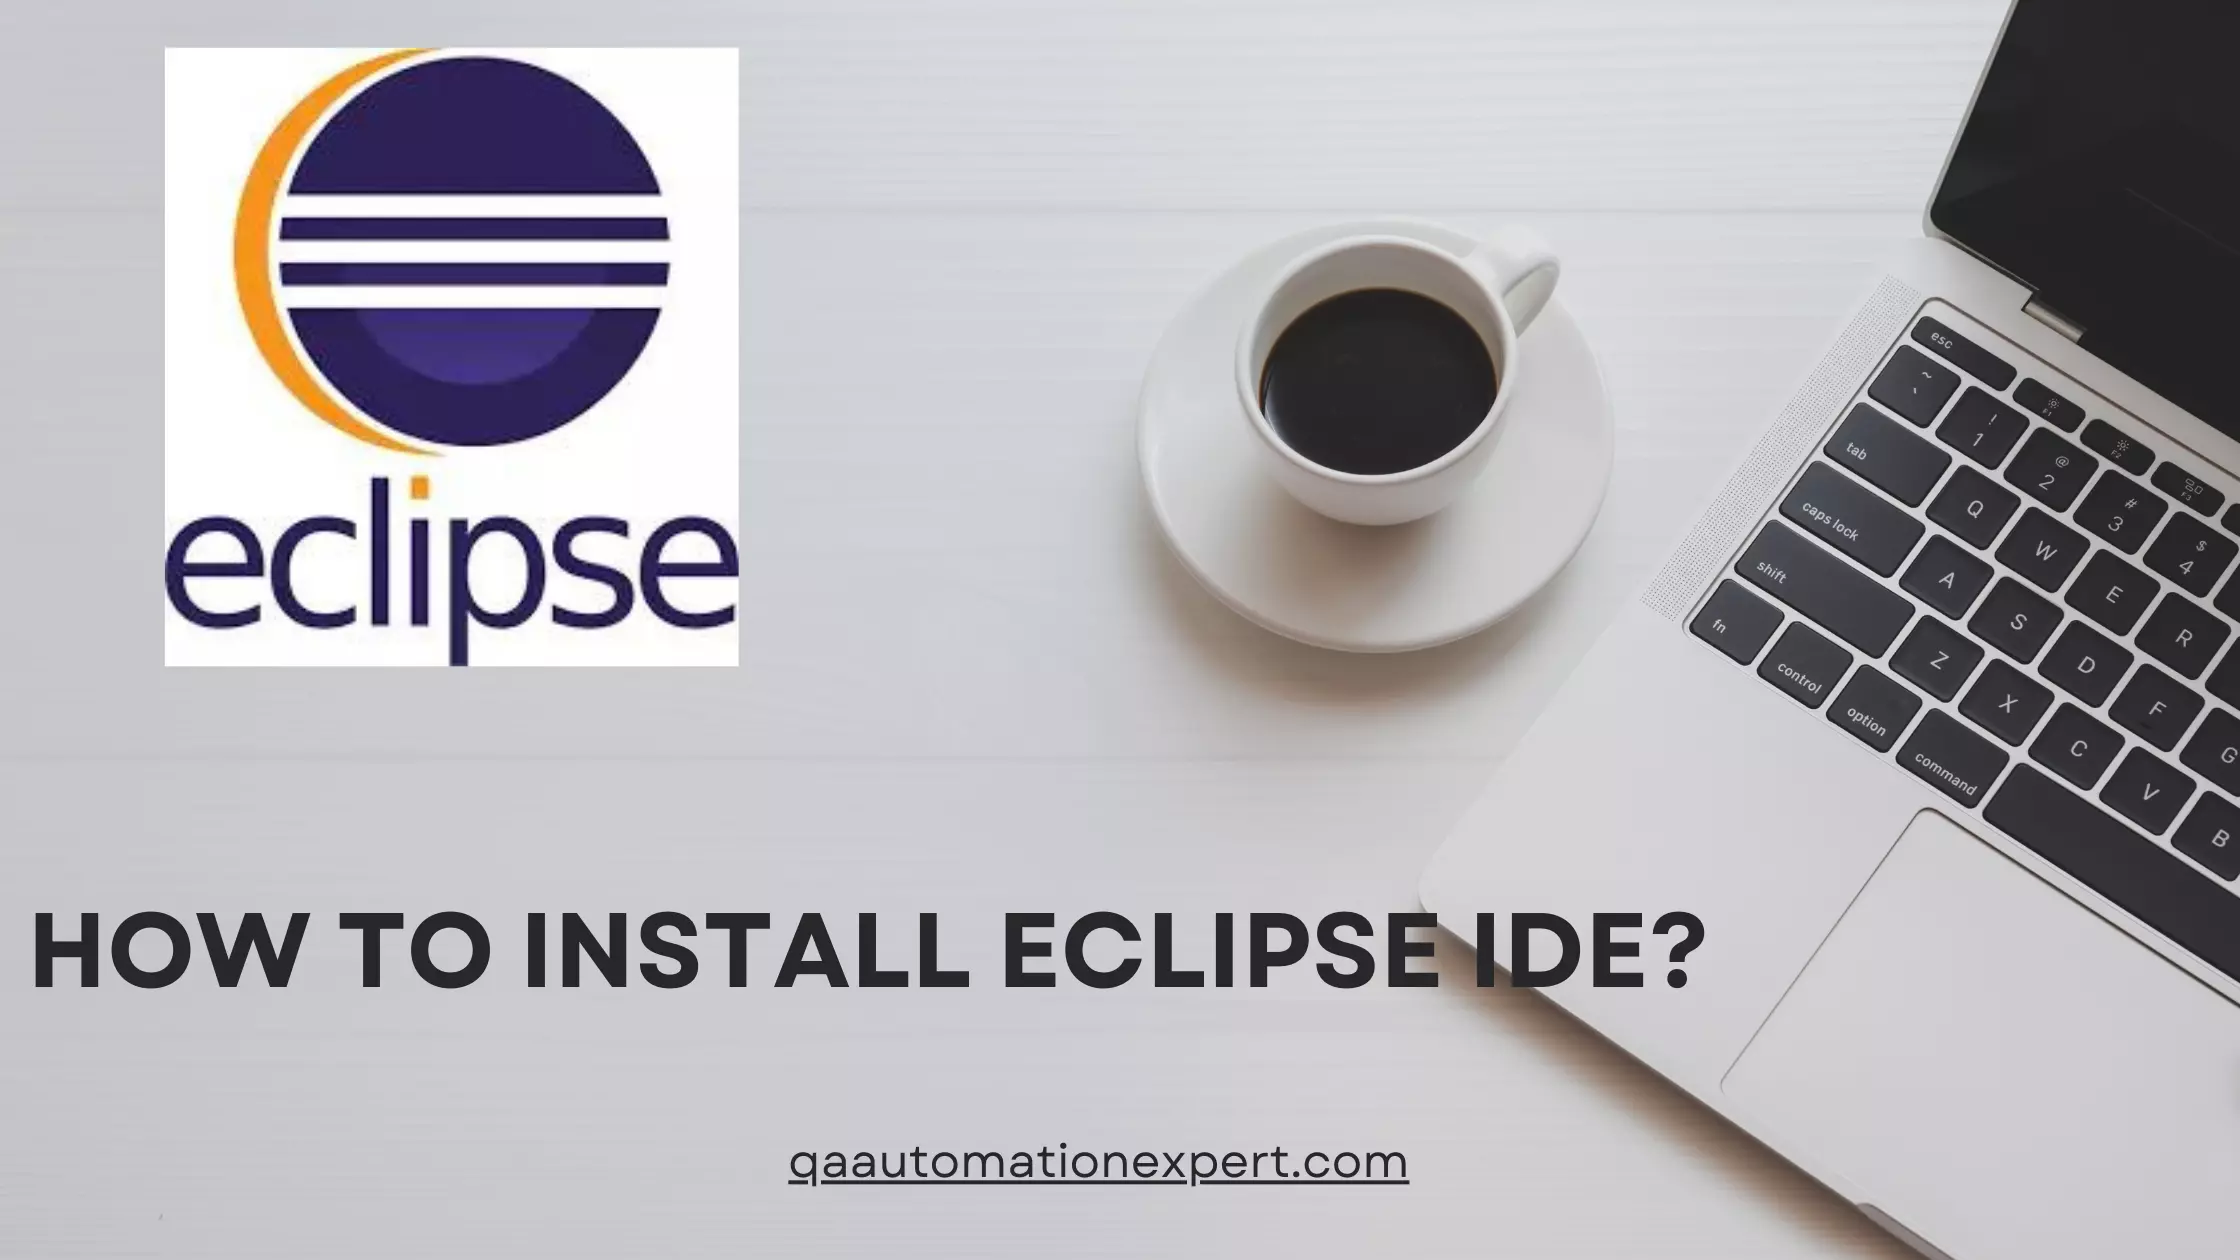 How to install Eclipse IDE?